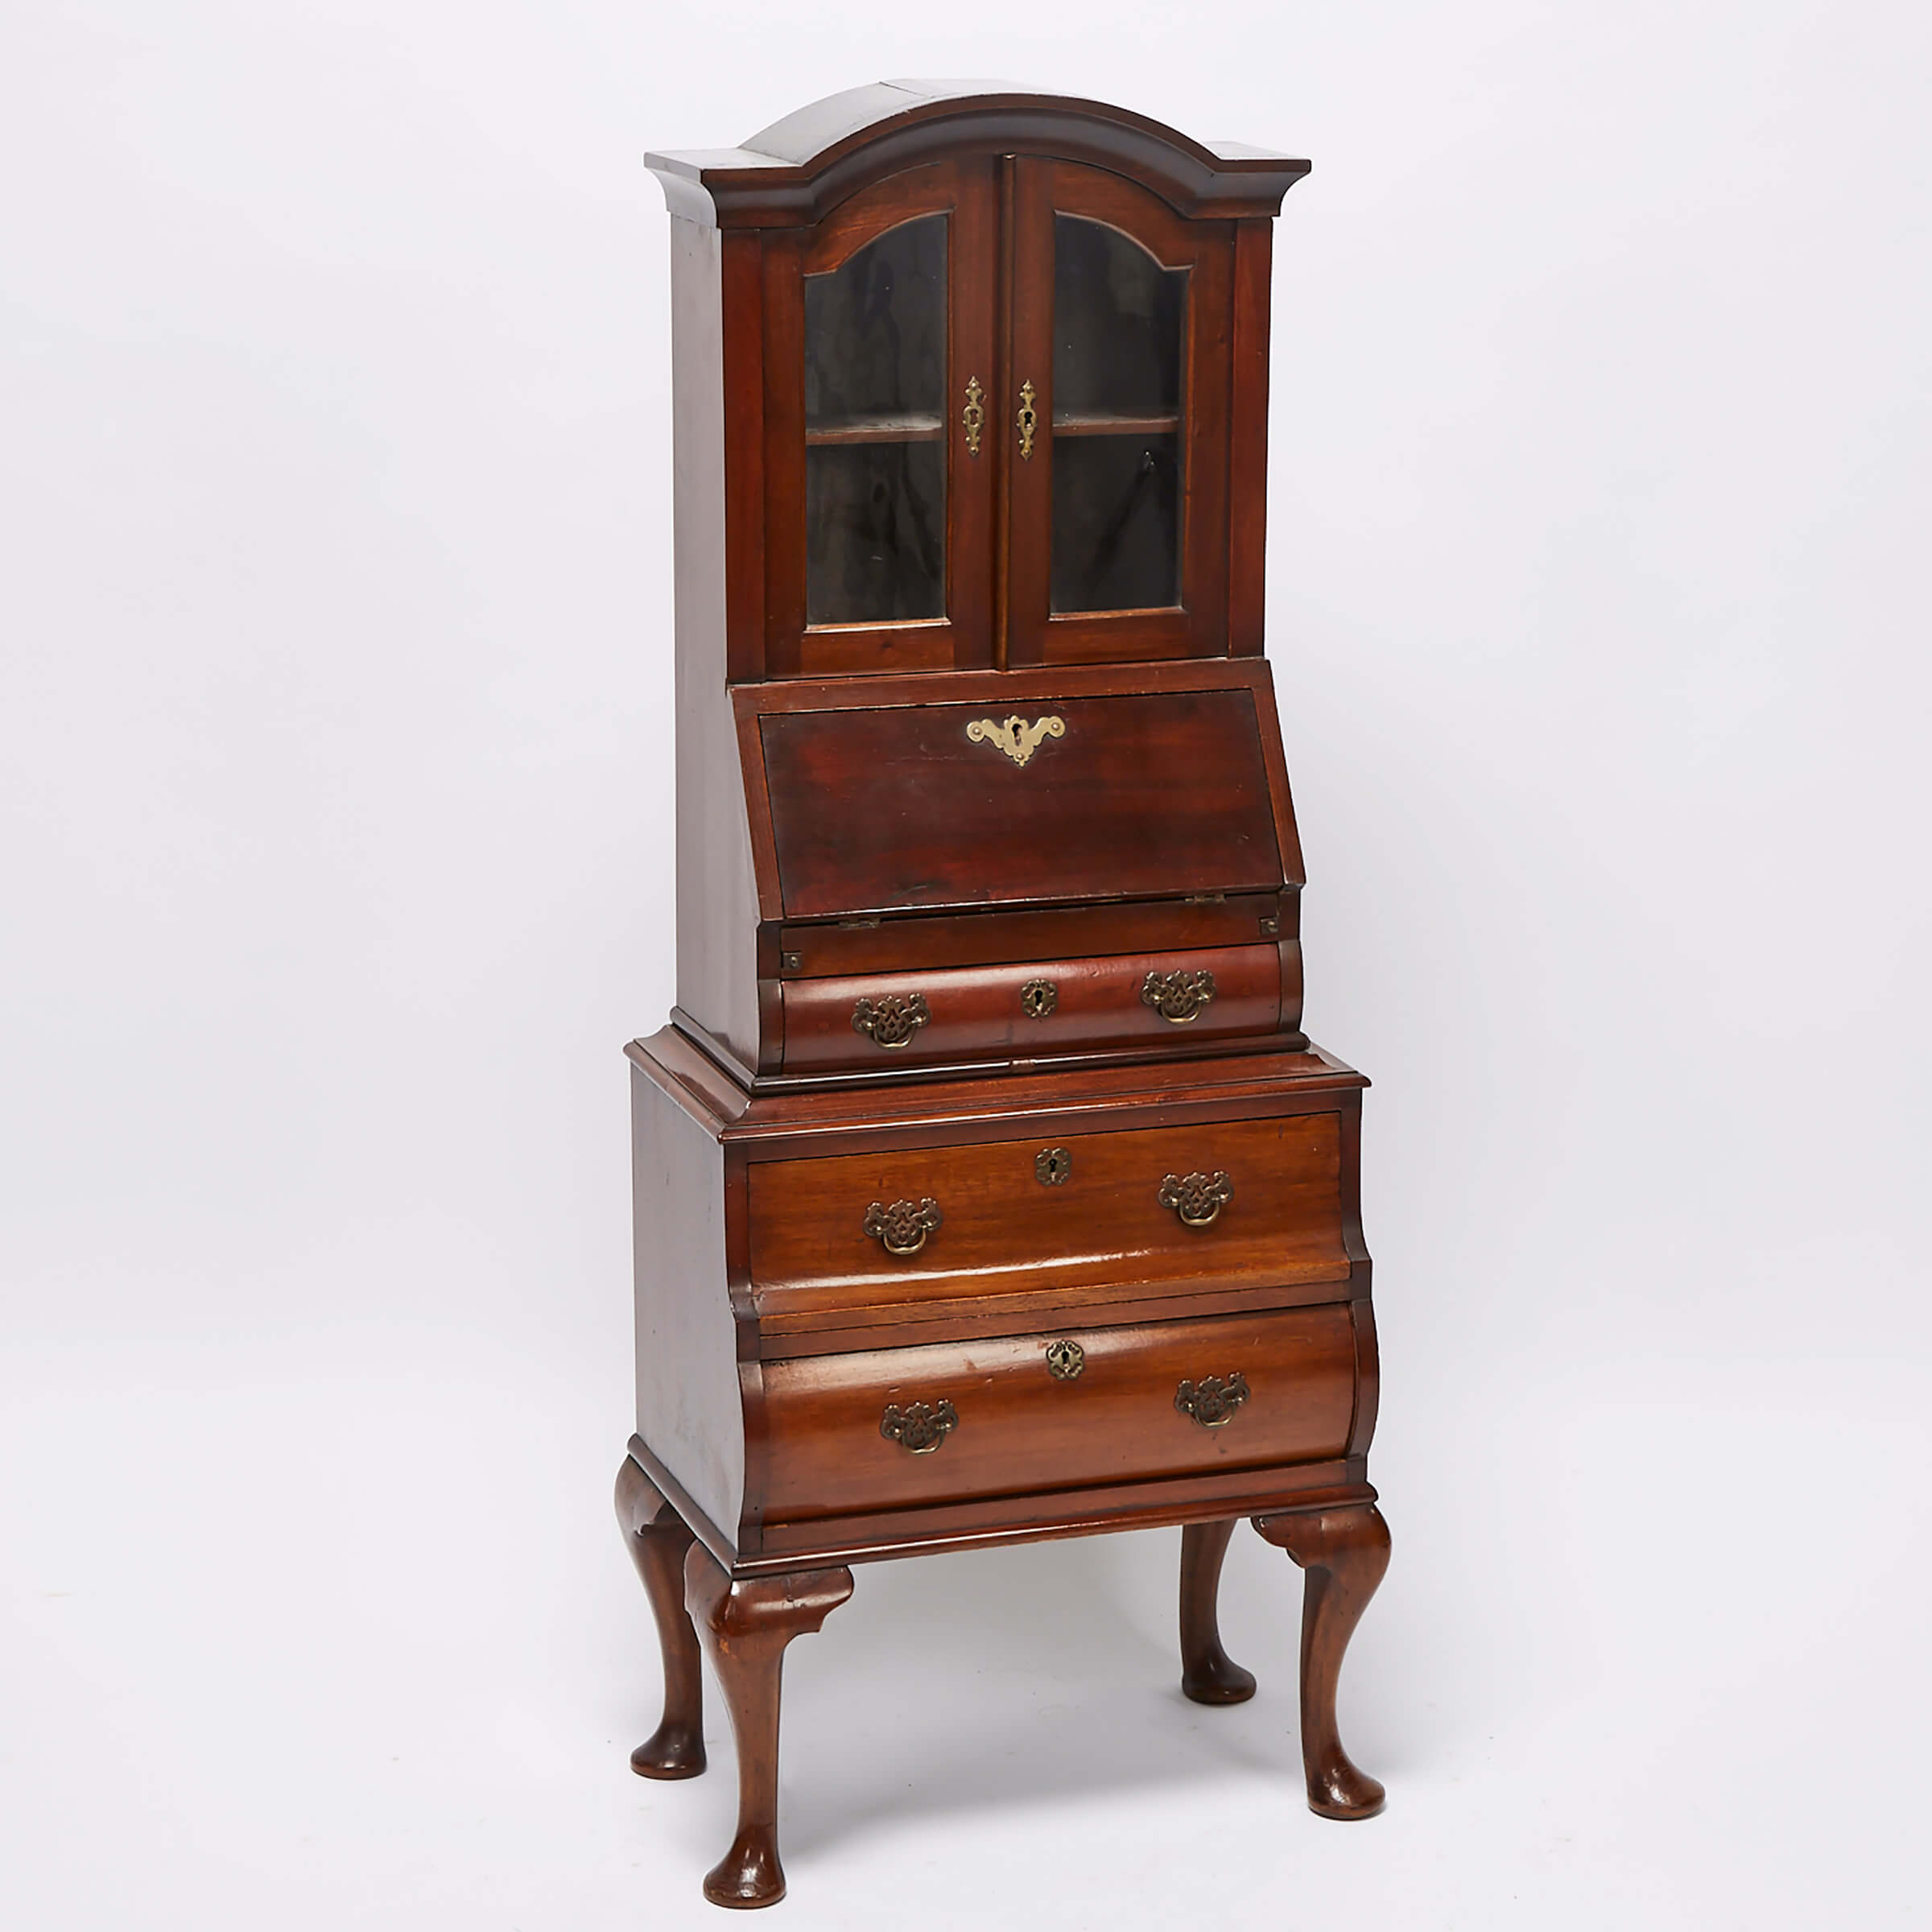 Miniature Queen Anne Style Mahogany Secretary Bookcase on Stand, early 20th century